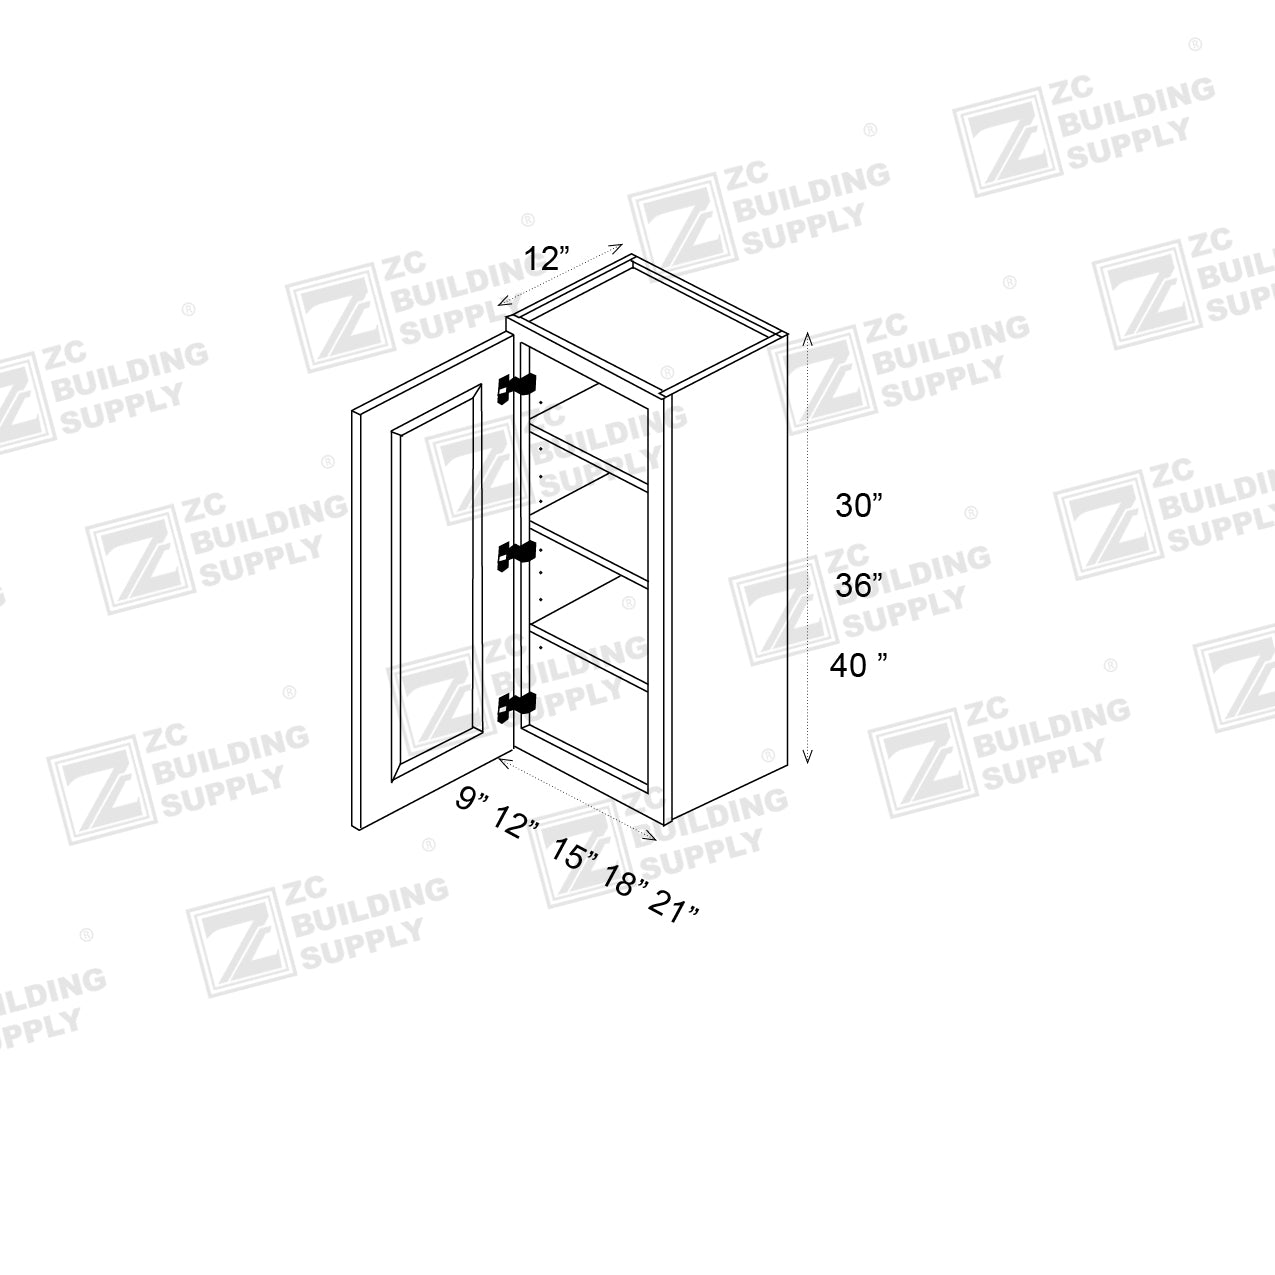 Wall 21" - Pure White 21 Inches Wall Cabinet - ZCBuildingSupply